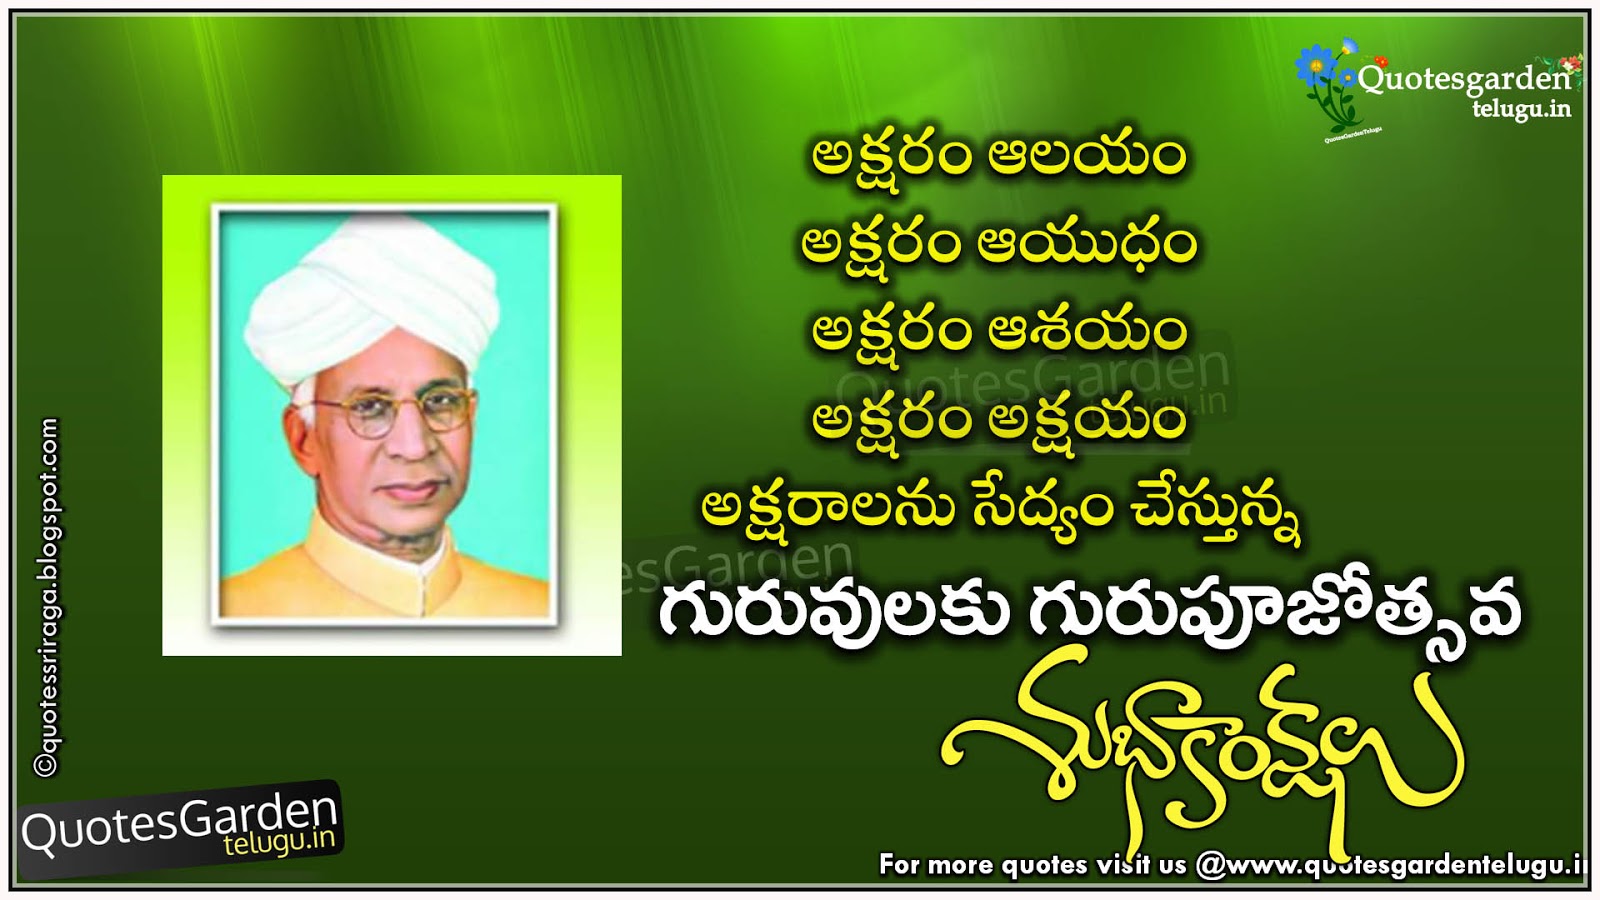 happy teachers Day Telugu Greetings online e-cards | QUOTES GARDEN ...